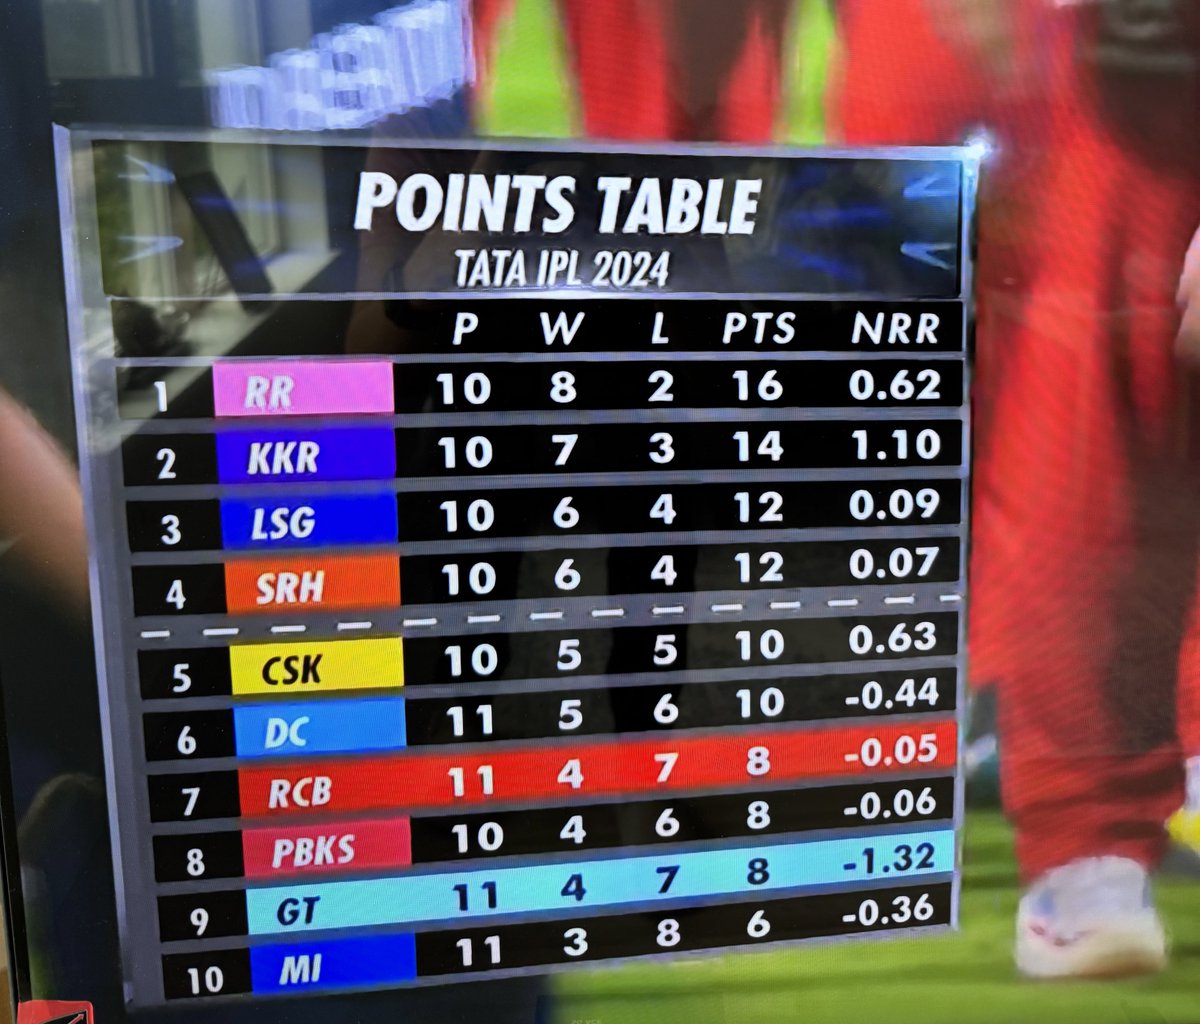 RCB moves to 7th. Finally!